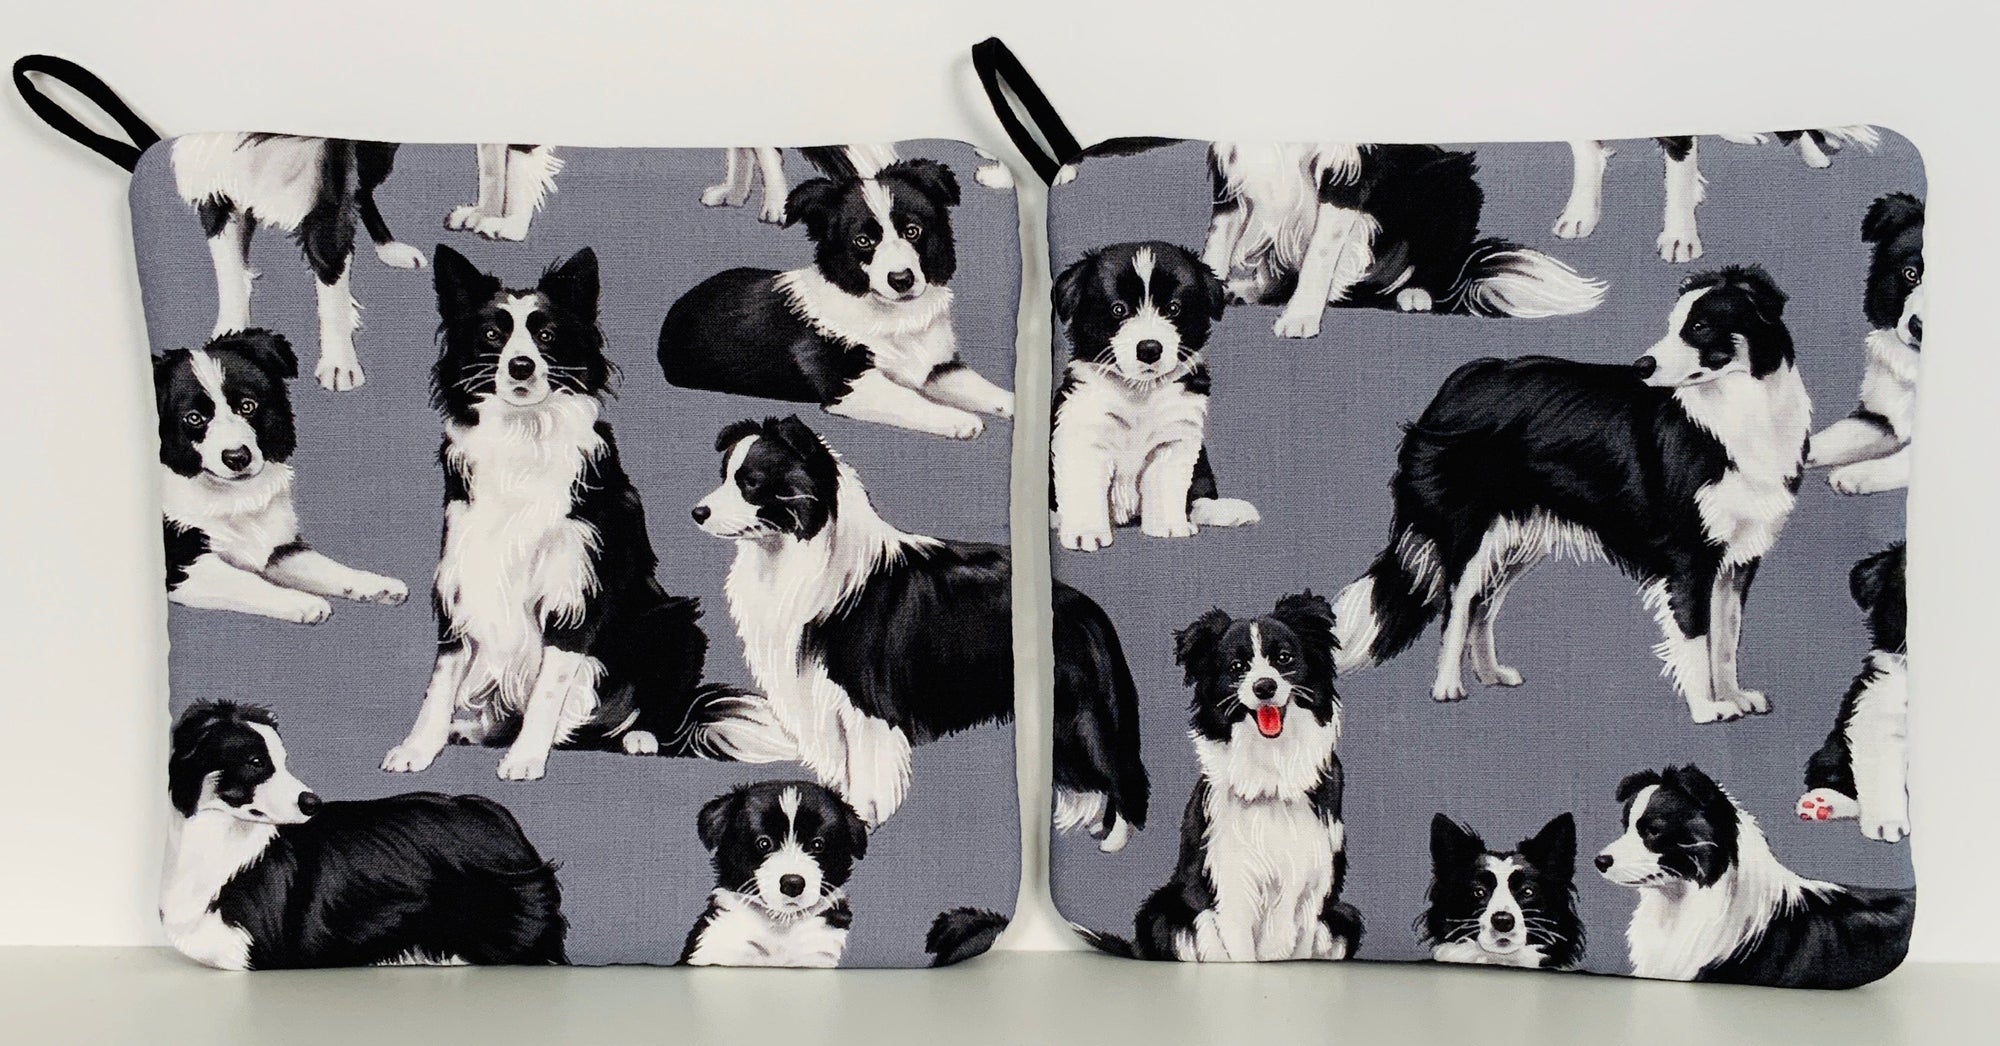 Hot Pads! Border Collie